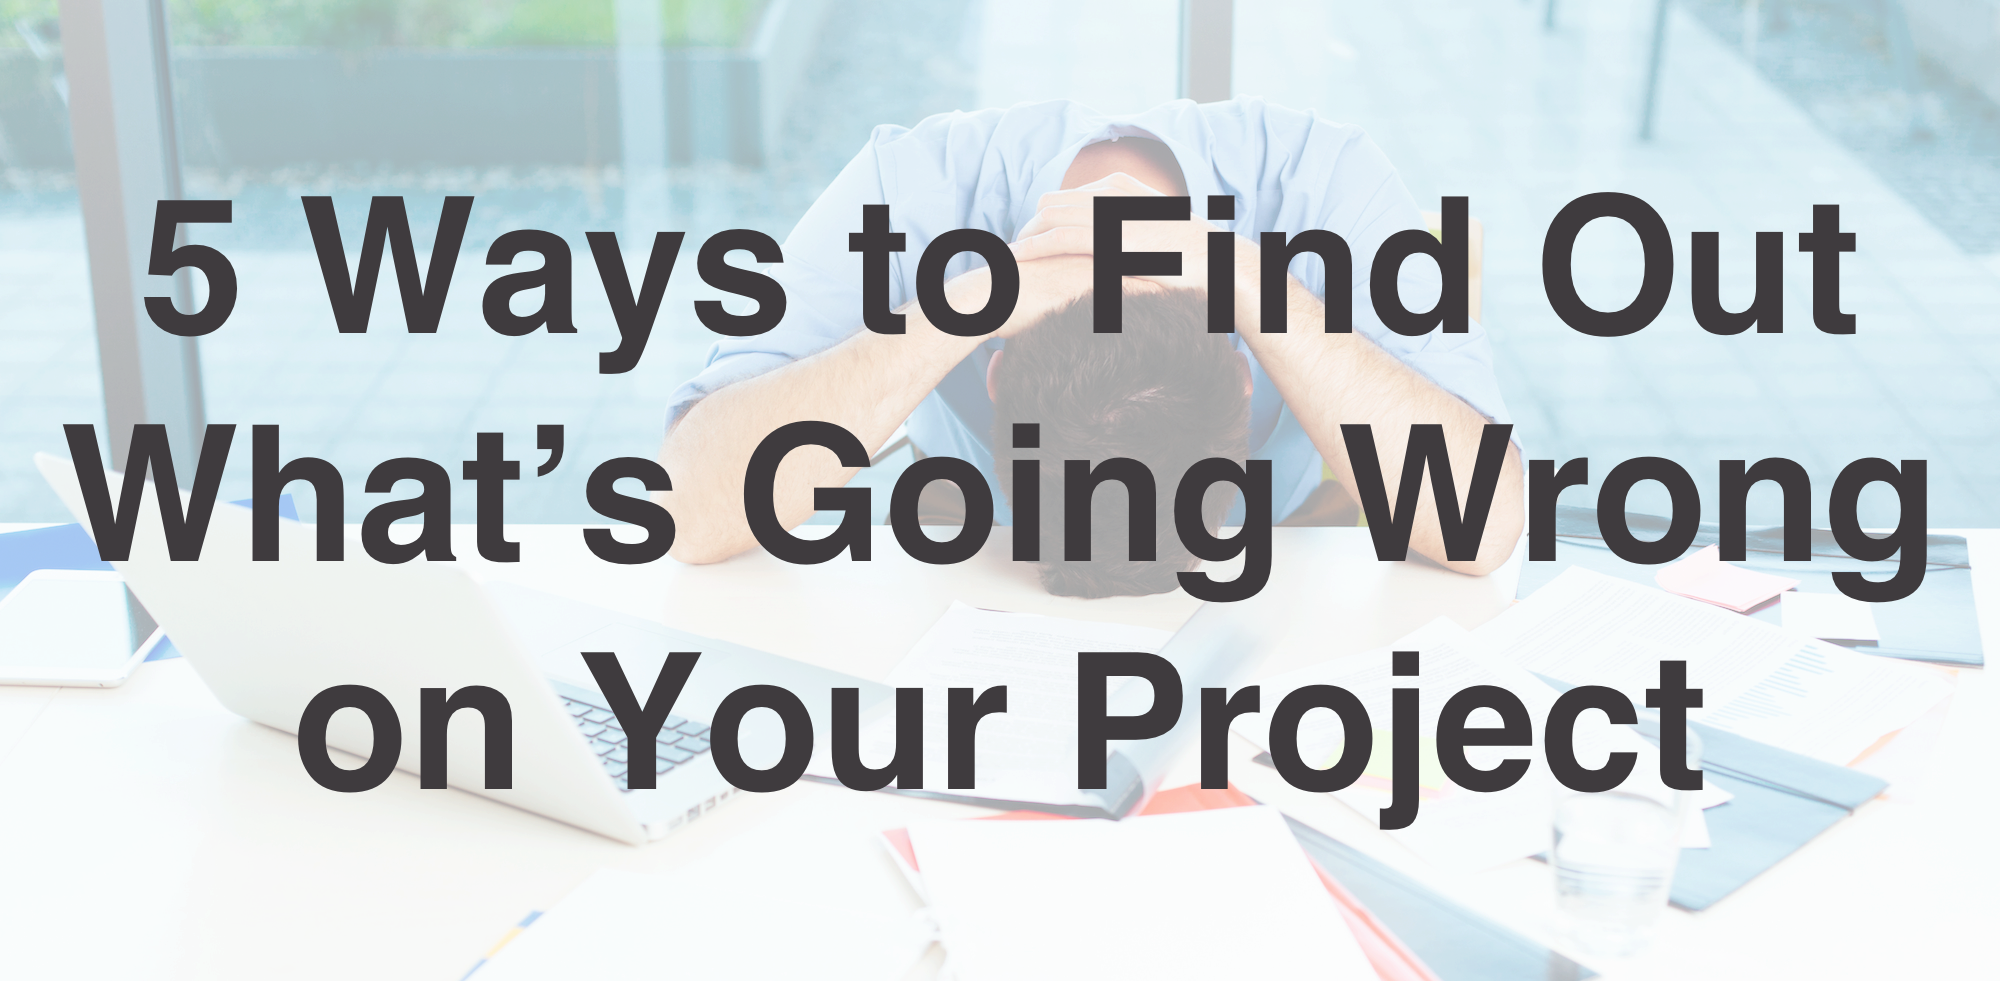 What’s Going Wrong on Your Project